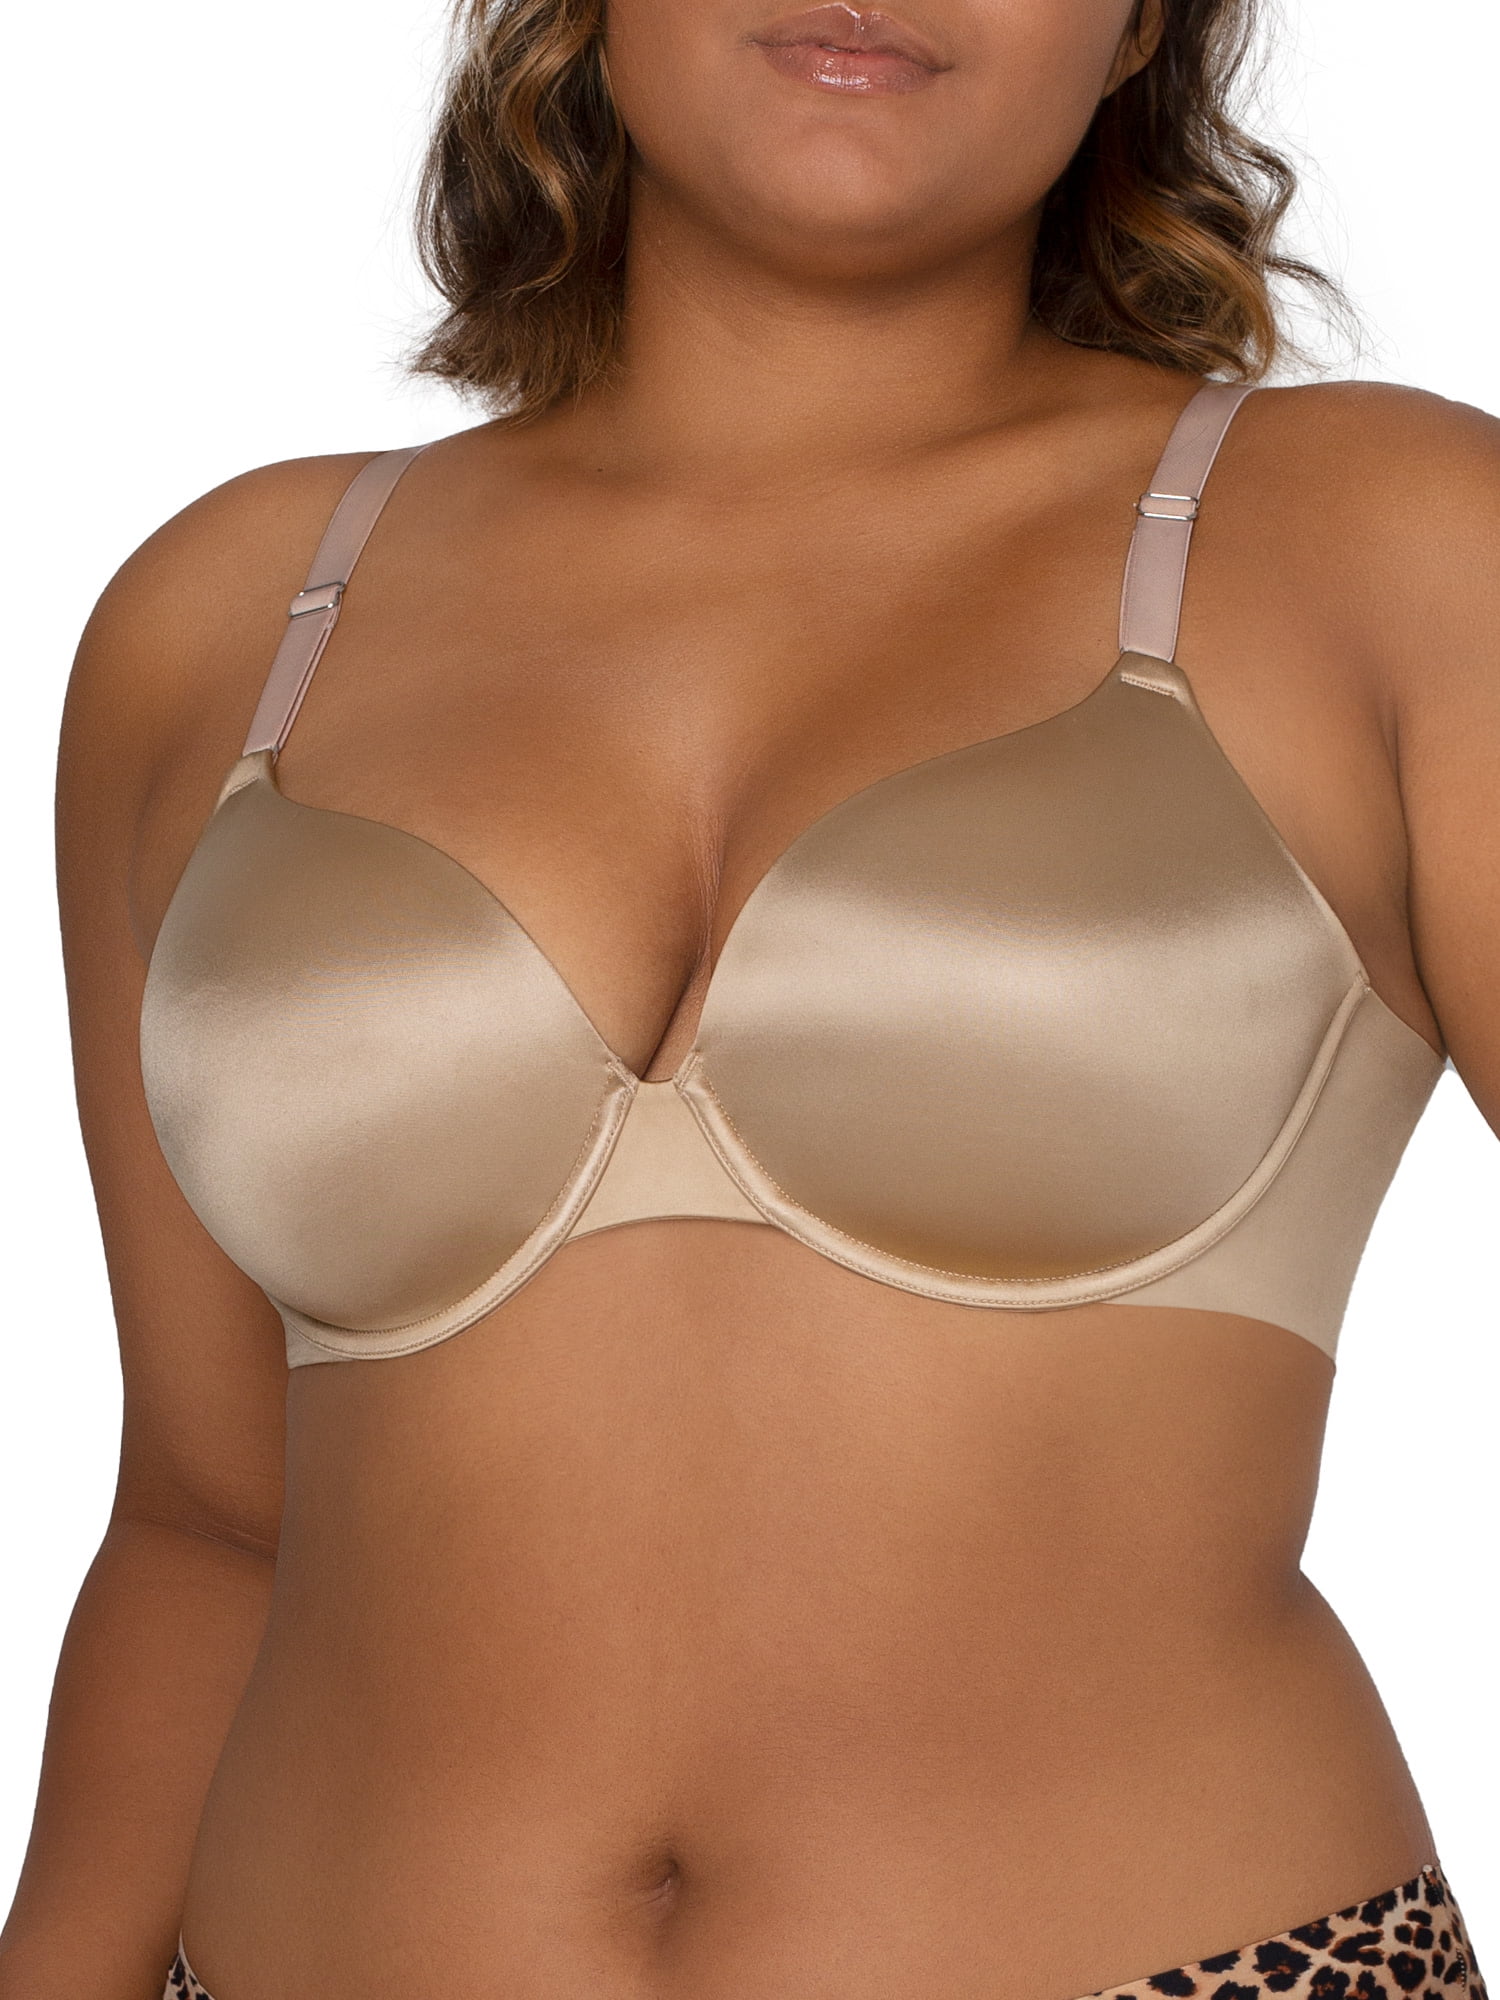 Cacique Tan/Cream Smooth Bust Plunge Bra Size 38D - $19 - From Tara